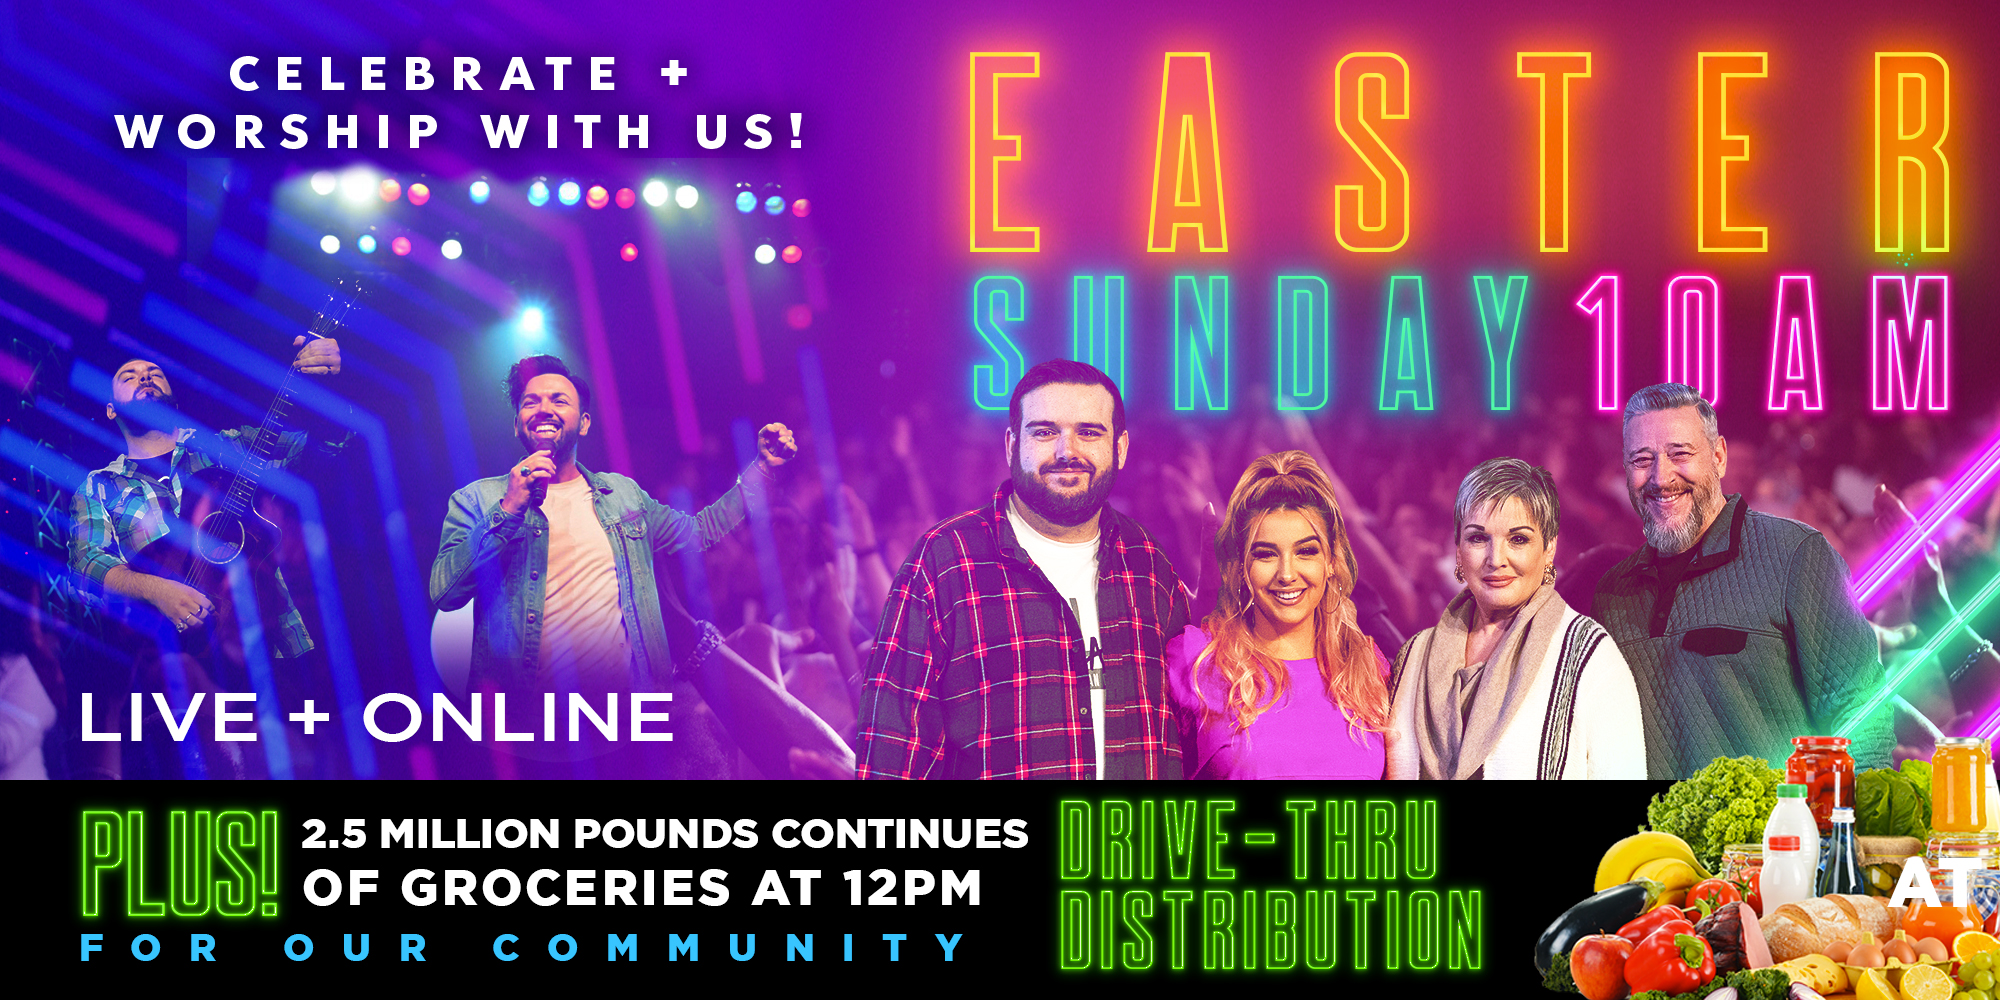 Celebrate and Worship with Us! Easter Sunday 10AM Live and Online Plus! 2.5 Million Pounds Continues of Groceries at 12PM For Our Community Drive-Thru Distribuiton